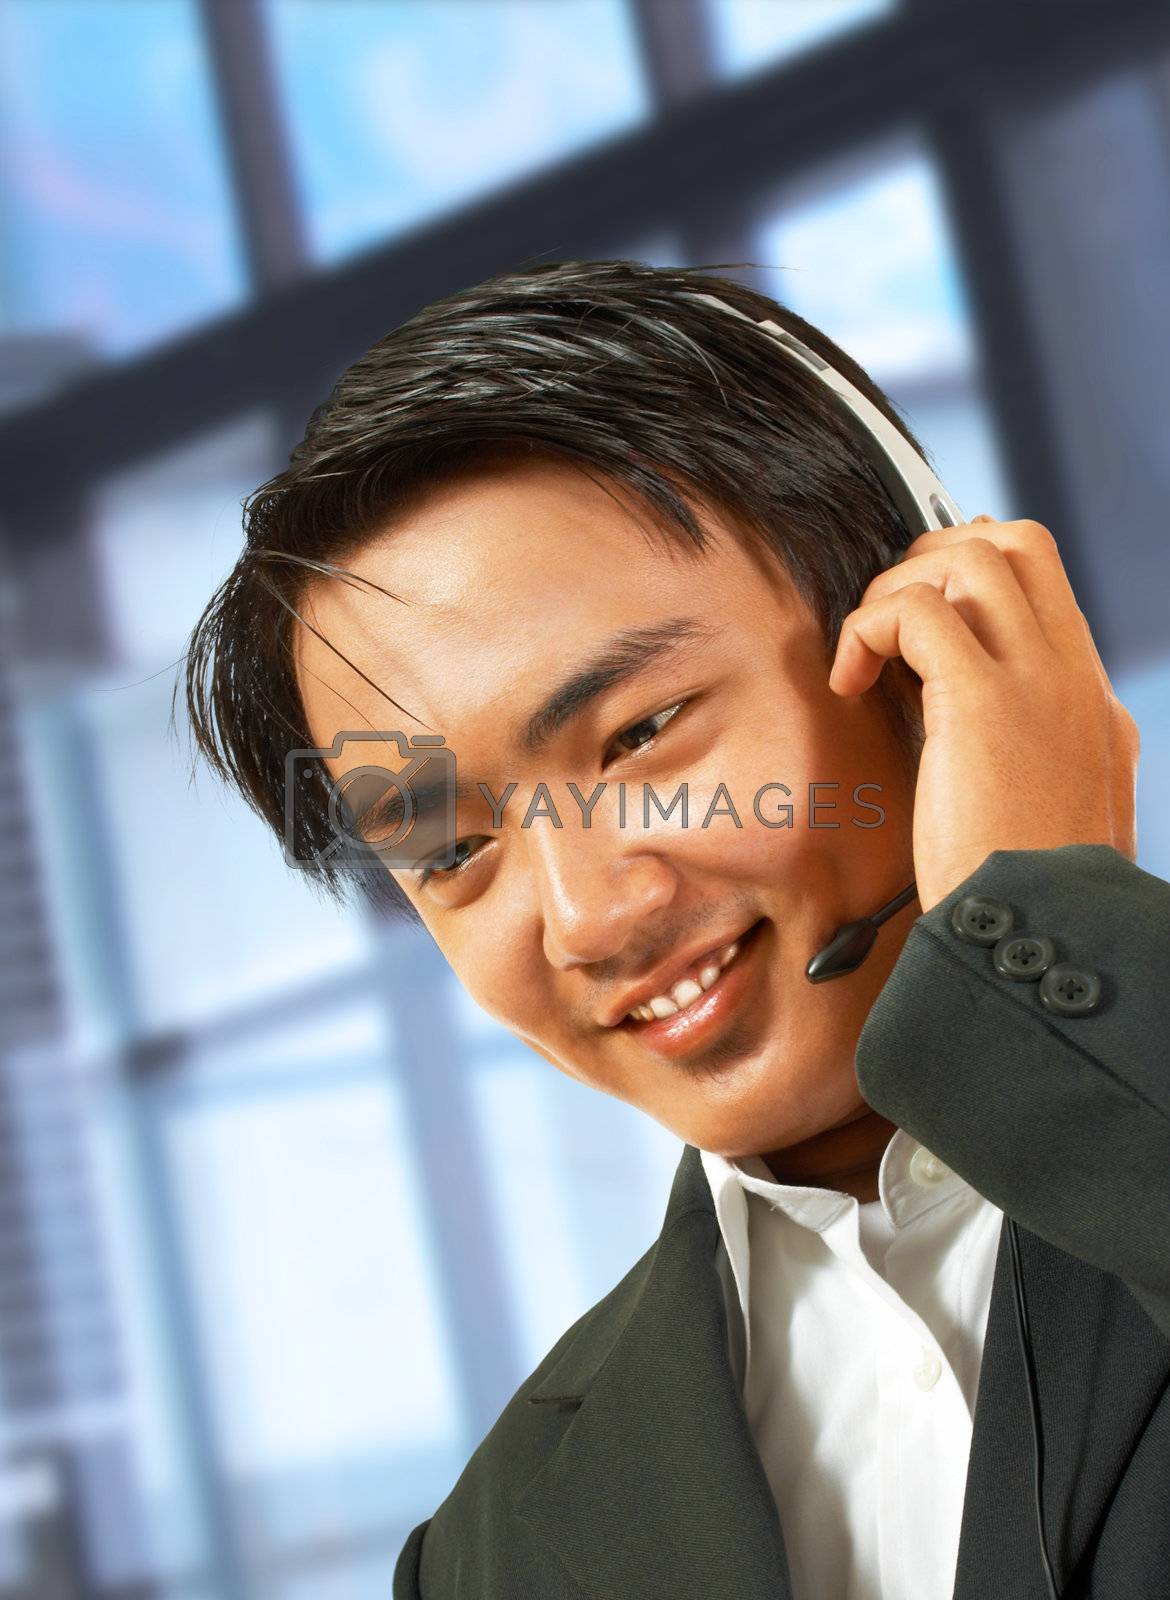 Customer Service Helpdesk Operator Talking To A Customer And Wearing A Headset